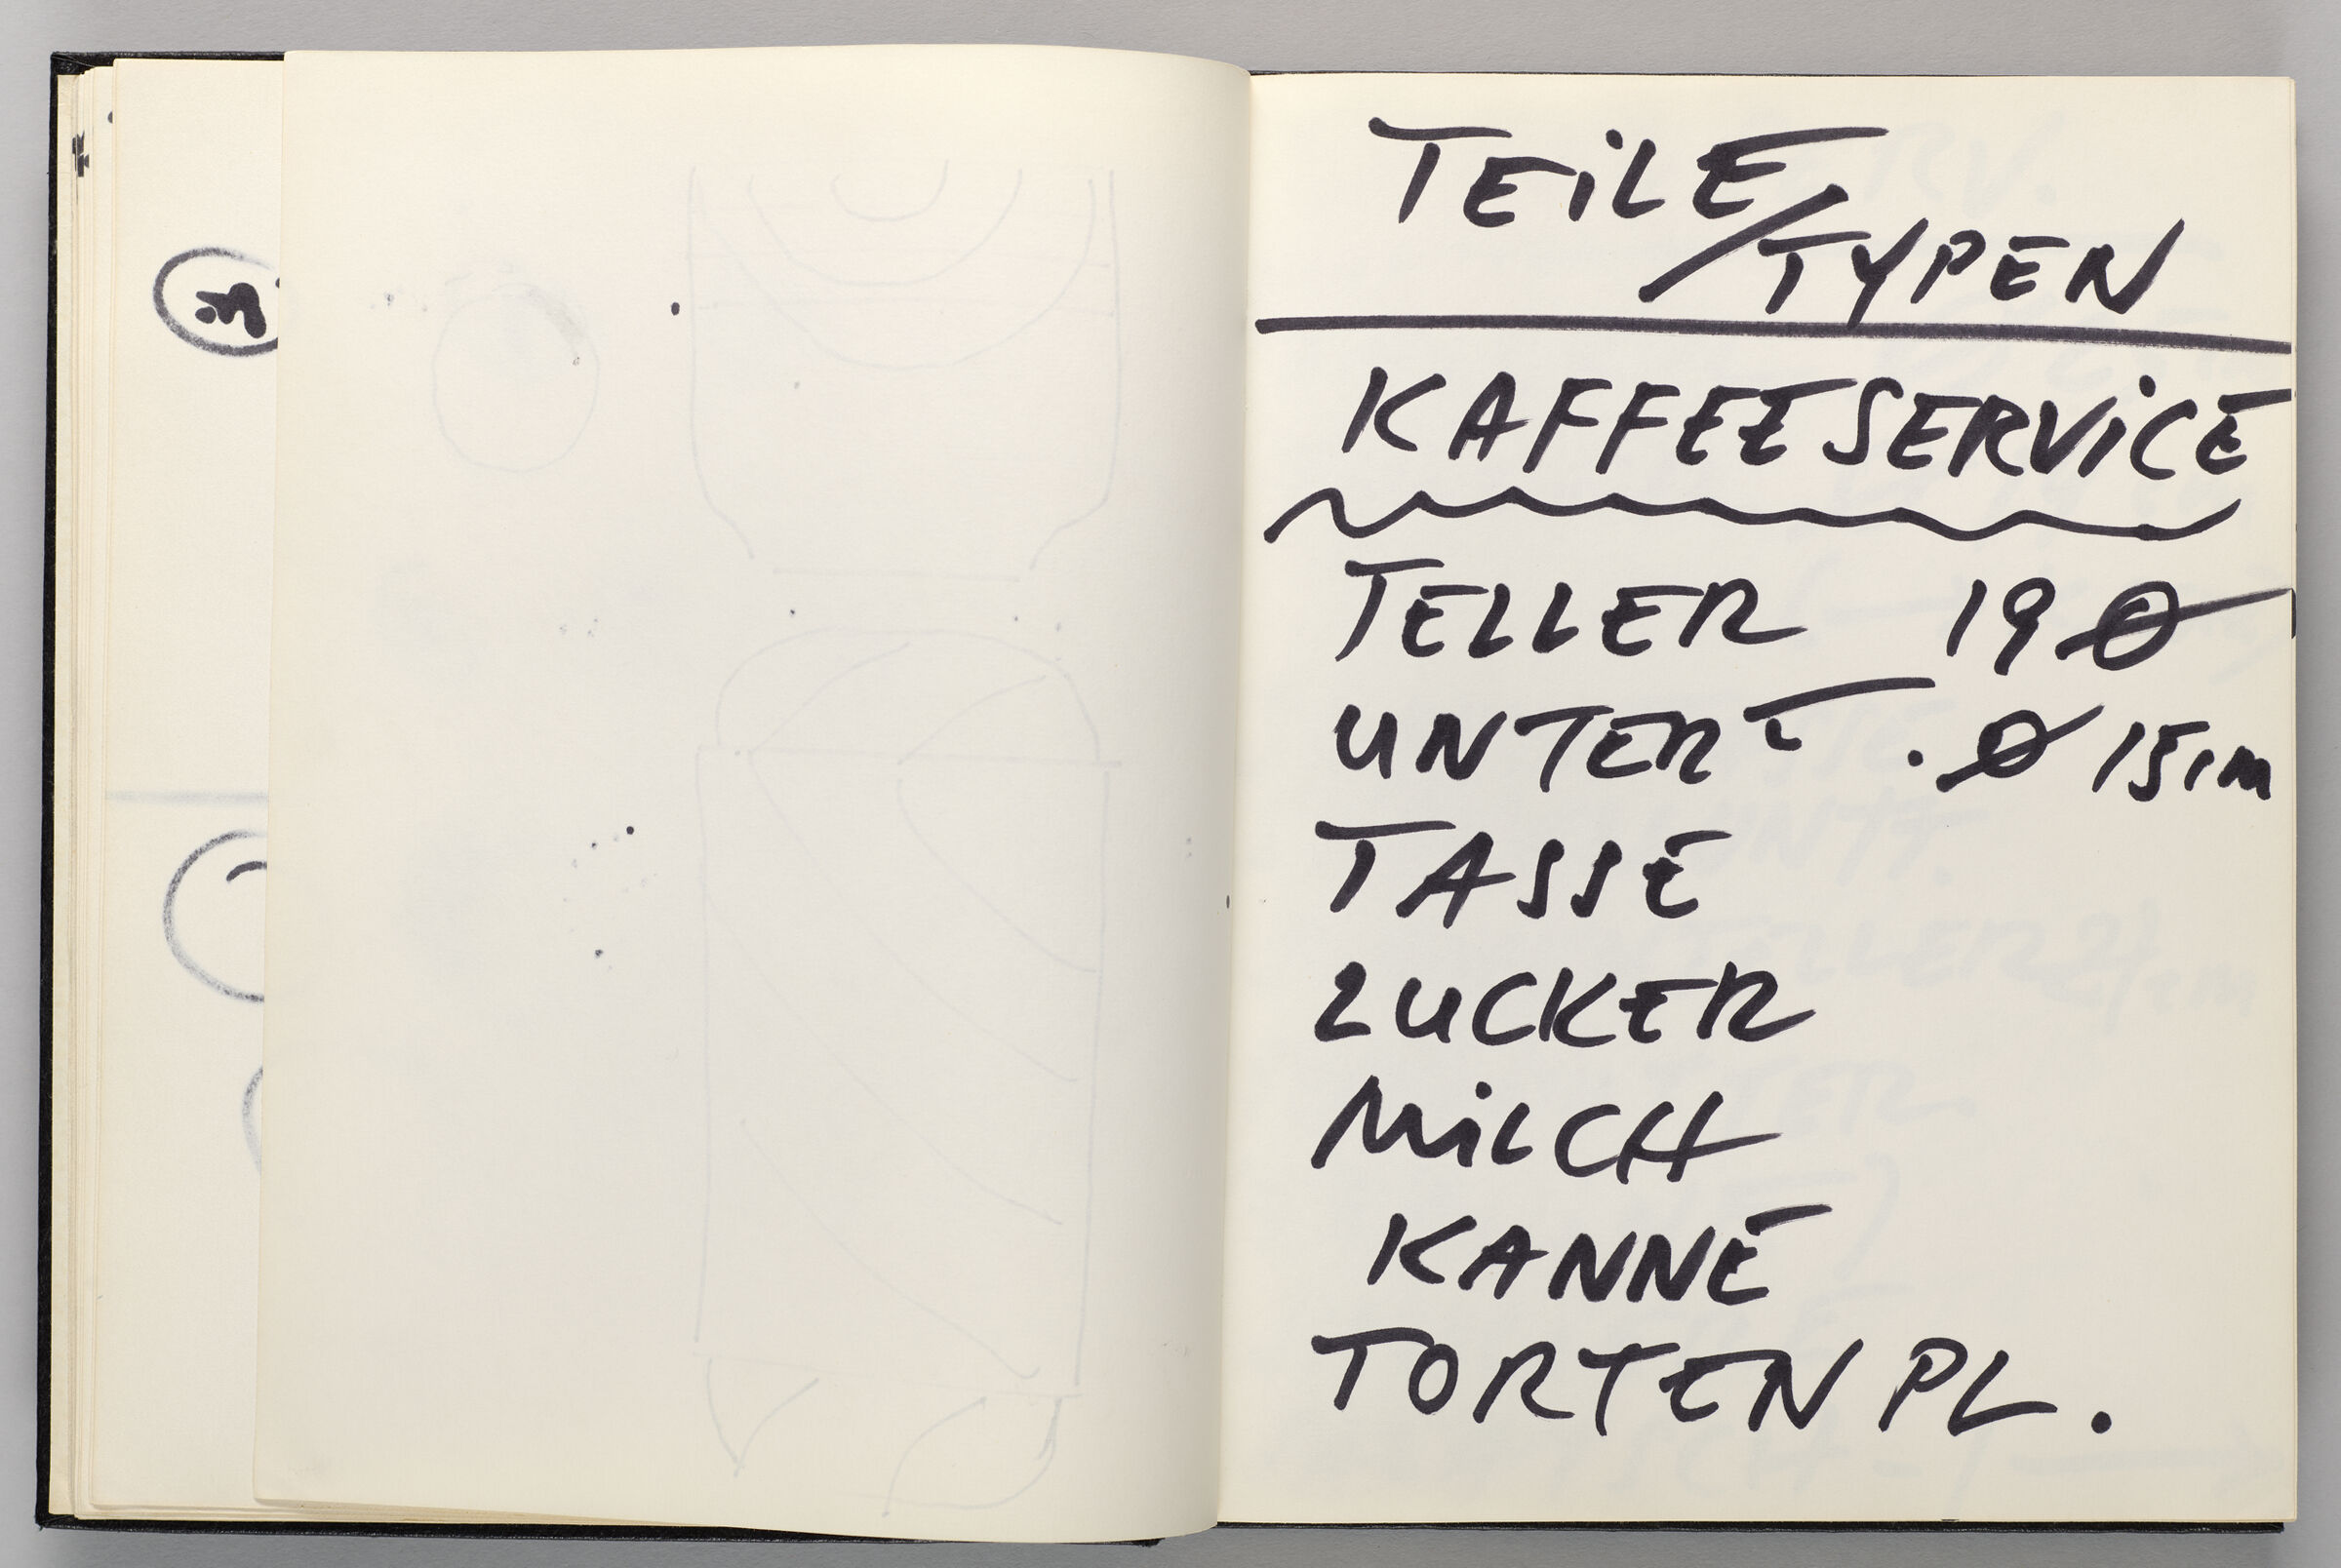 Untitled (Bleed-Through Of Previous Page, Left Page); Untitled (List Of Coffee Service Items, Right Page)